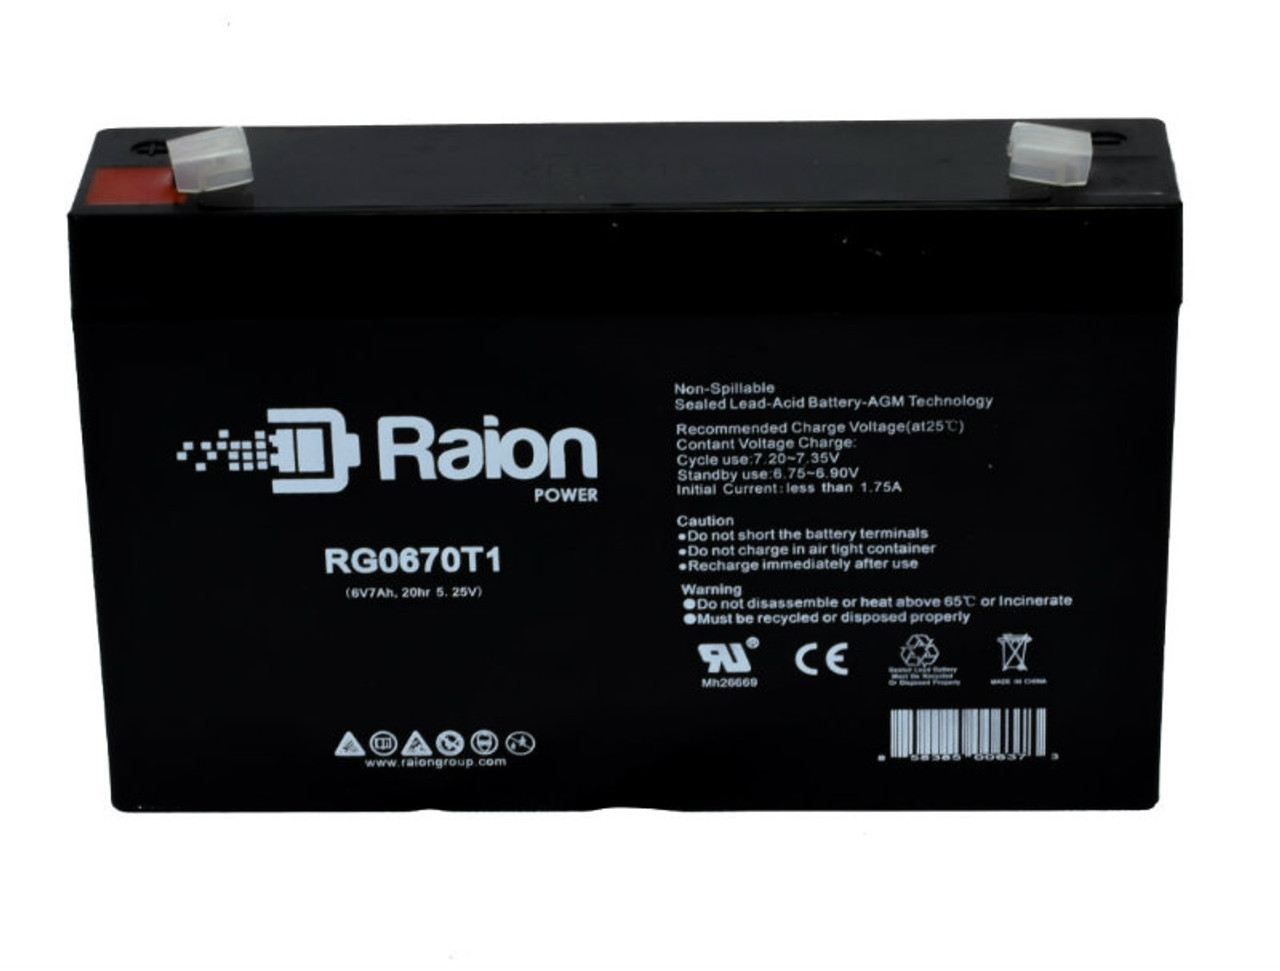 Raion Power RG0670T1 Replacement Battery Cartridge for Portalac GS PE6V7.2F1